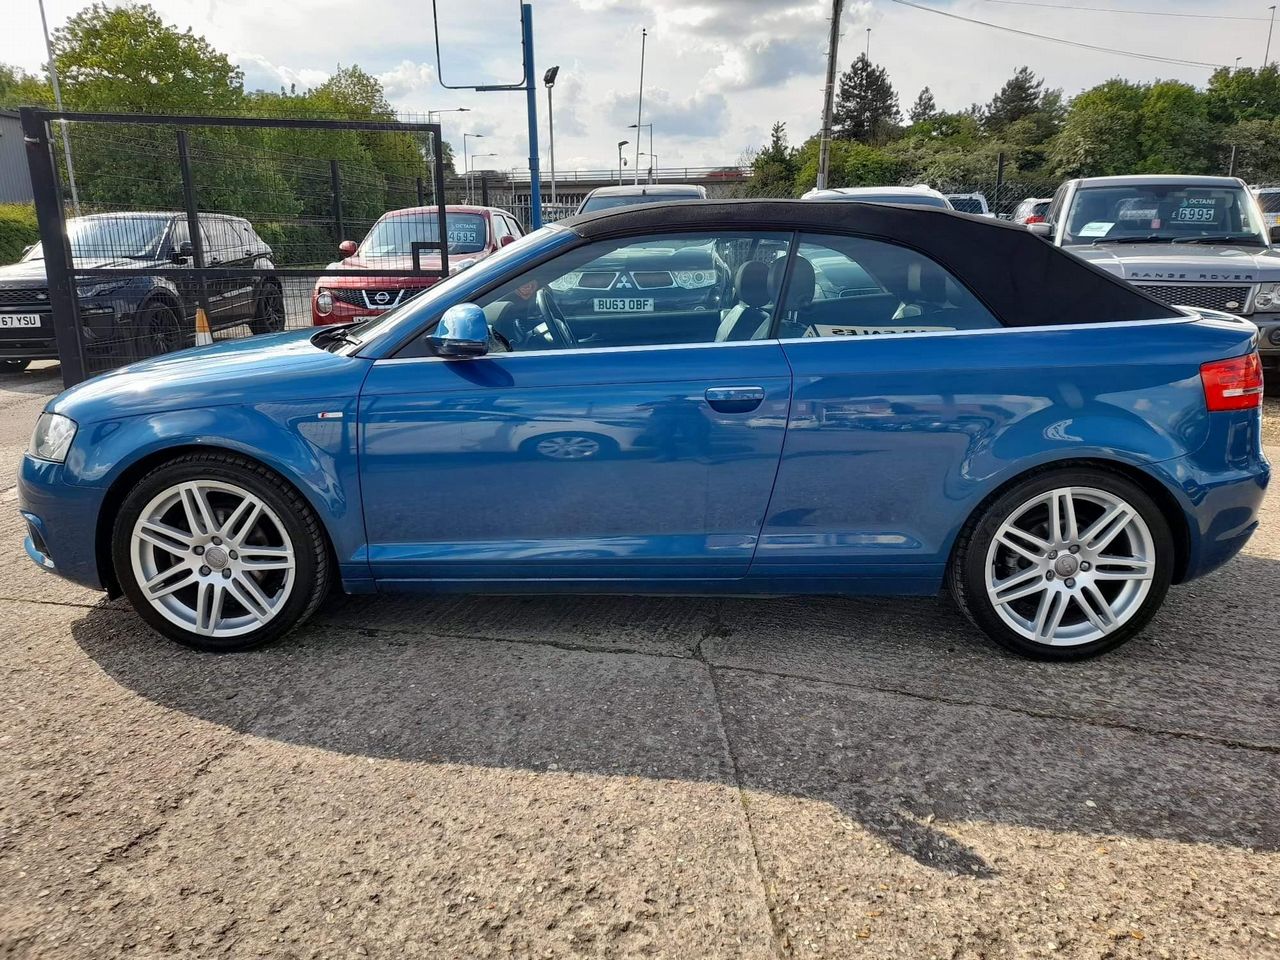 2009 Audi A3 Cabriolet 2.0 TDI S line Euro 4 2dr - Picture 5 of 37